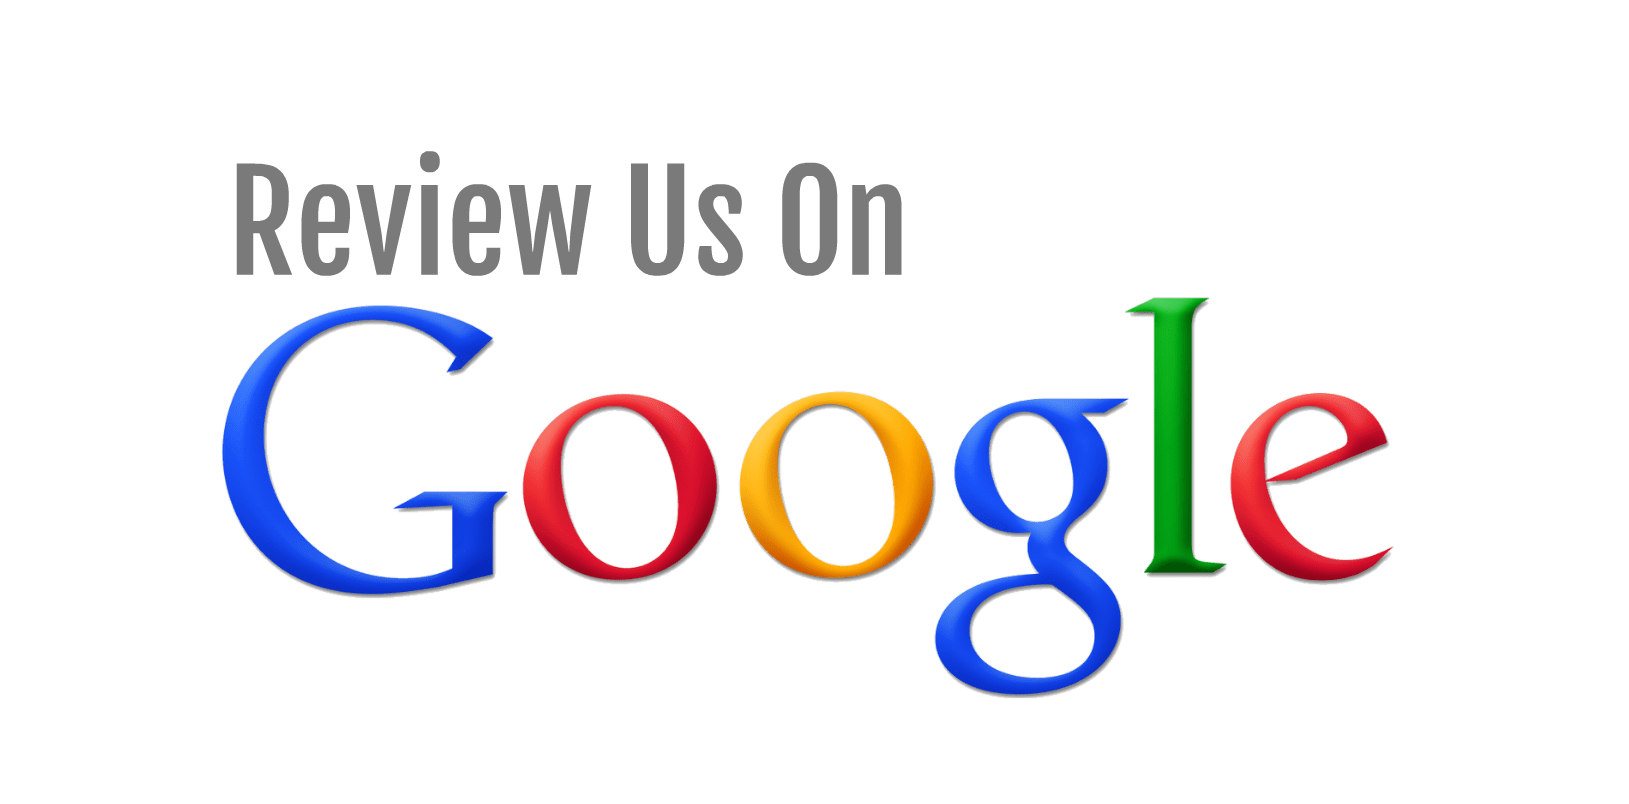 Google review link | Odessa, FL | Southline Contracting Group